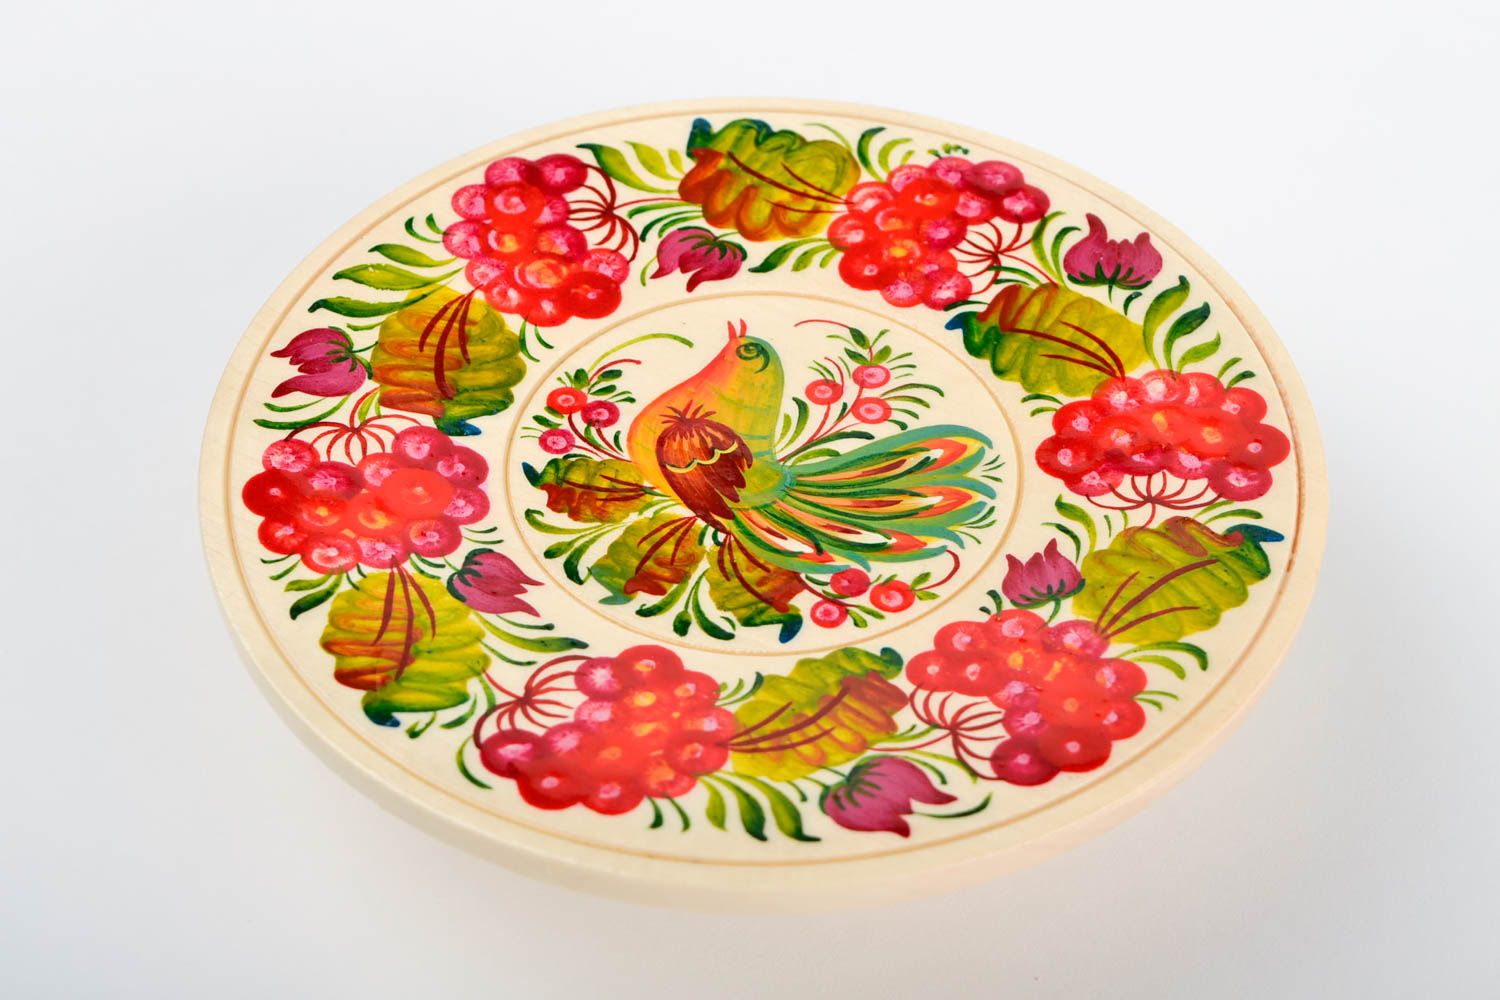 Handmade wooden plate for decorative use only folk art painted plate gift ideas photo 3